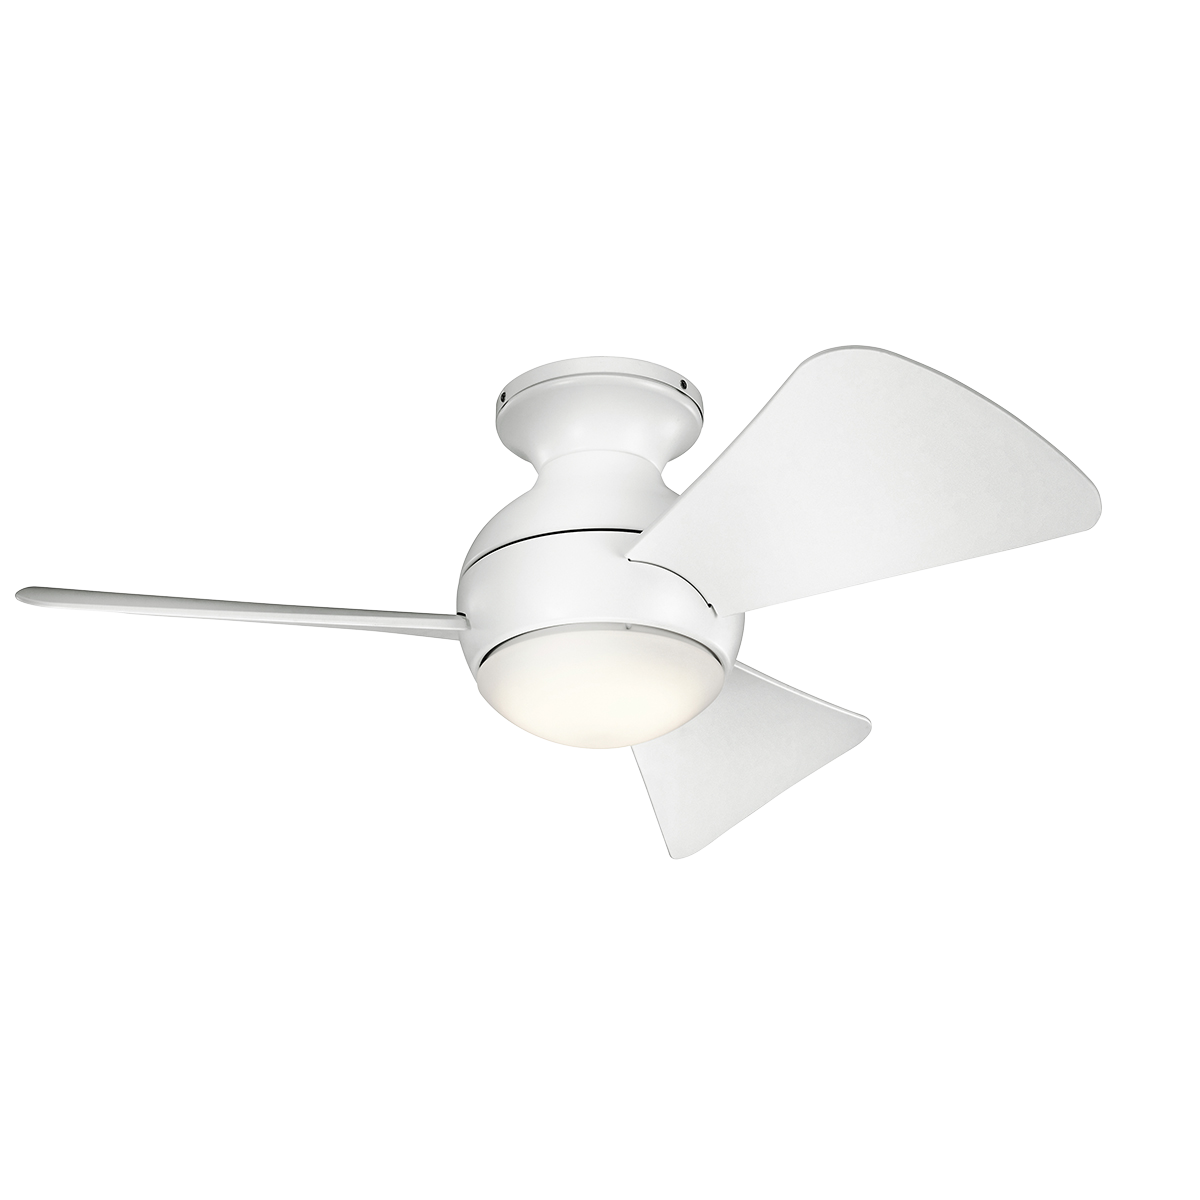 34 Inch Sola Fan in MWH,in. This Matte White 34 inch ceiling fan from the Sola collection which can be used in wet locations, features integrated LED lighting and flush mount installation.  The globe inspired motor housing shape brings delightful style to any space.  A metal fixture cap is included for non light use installations.